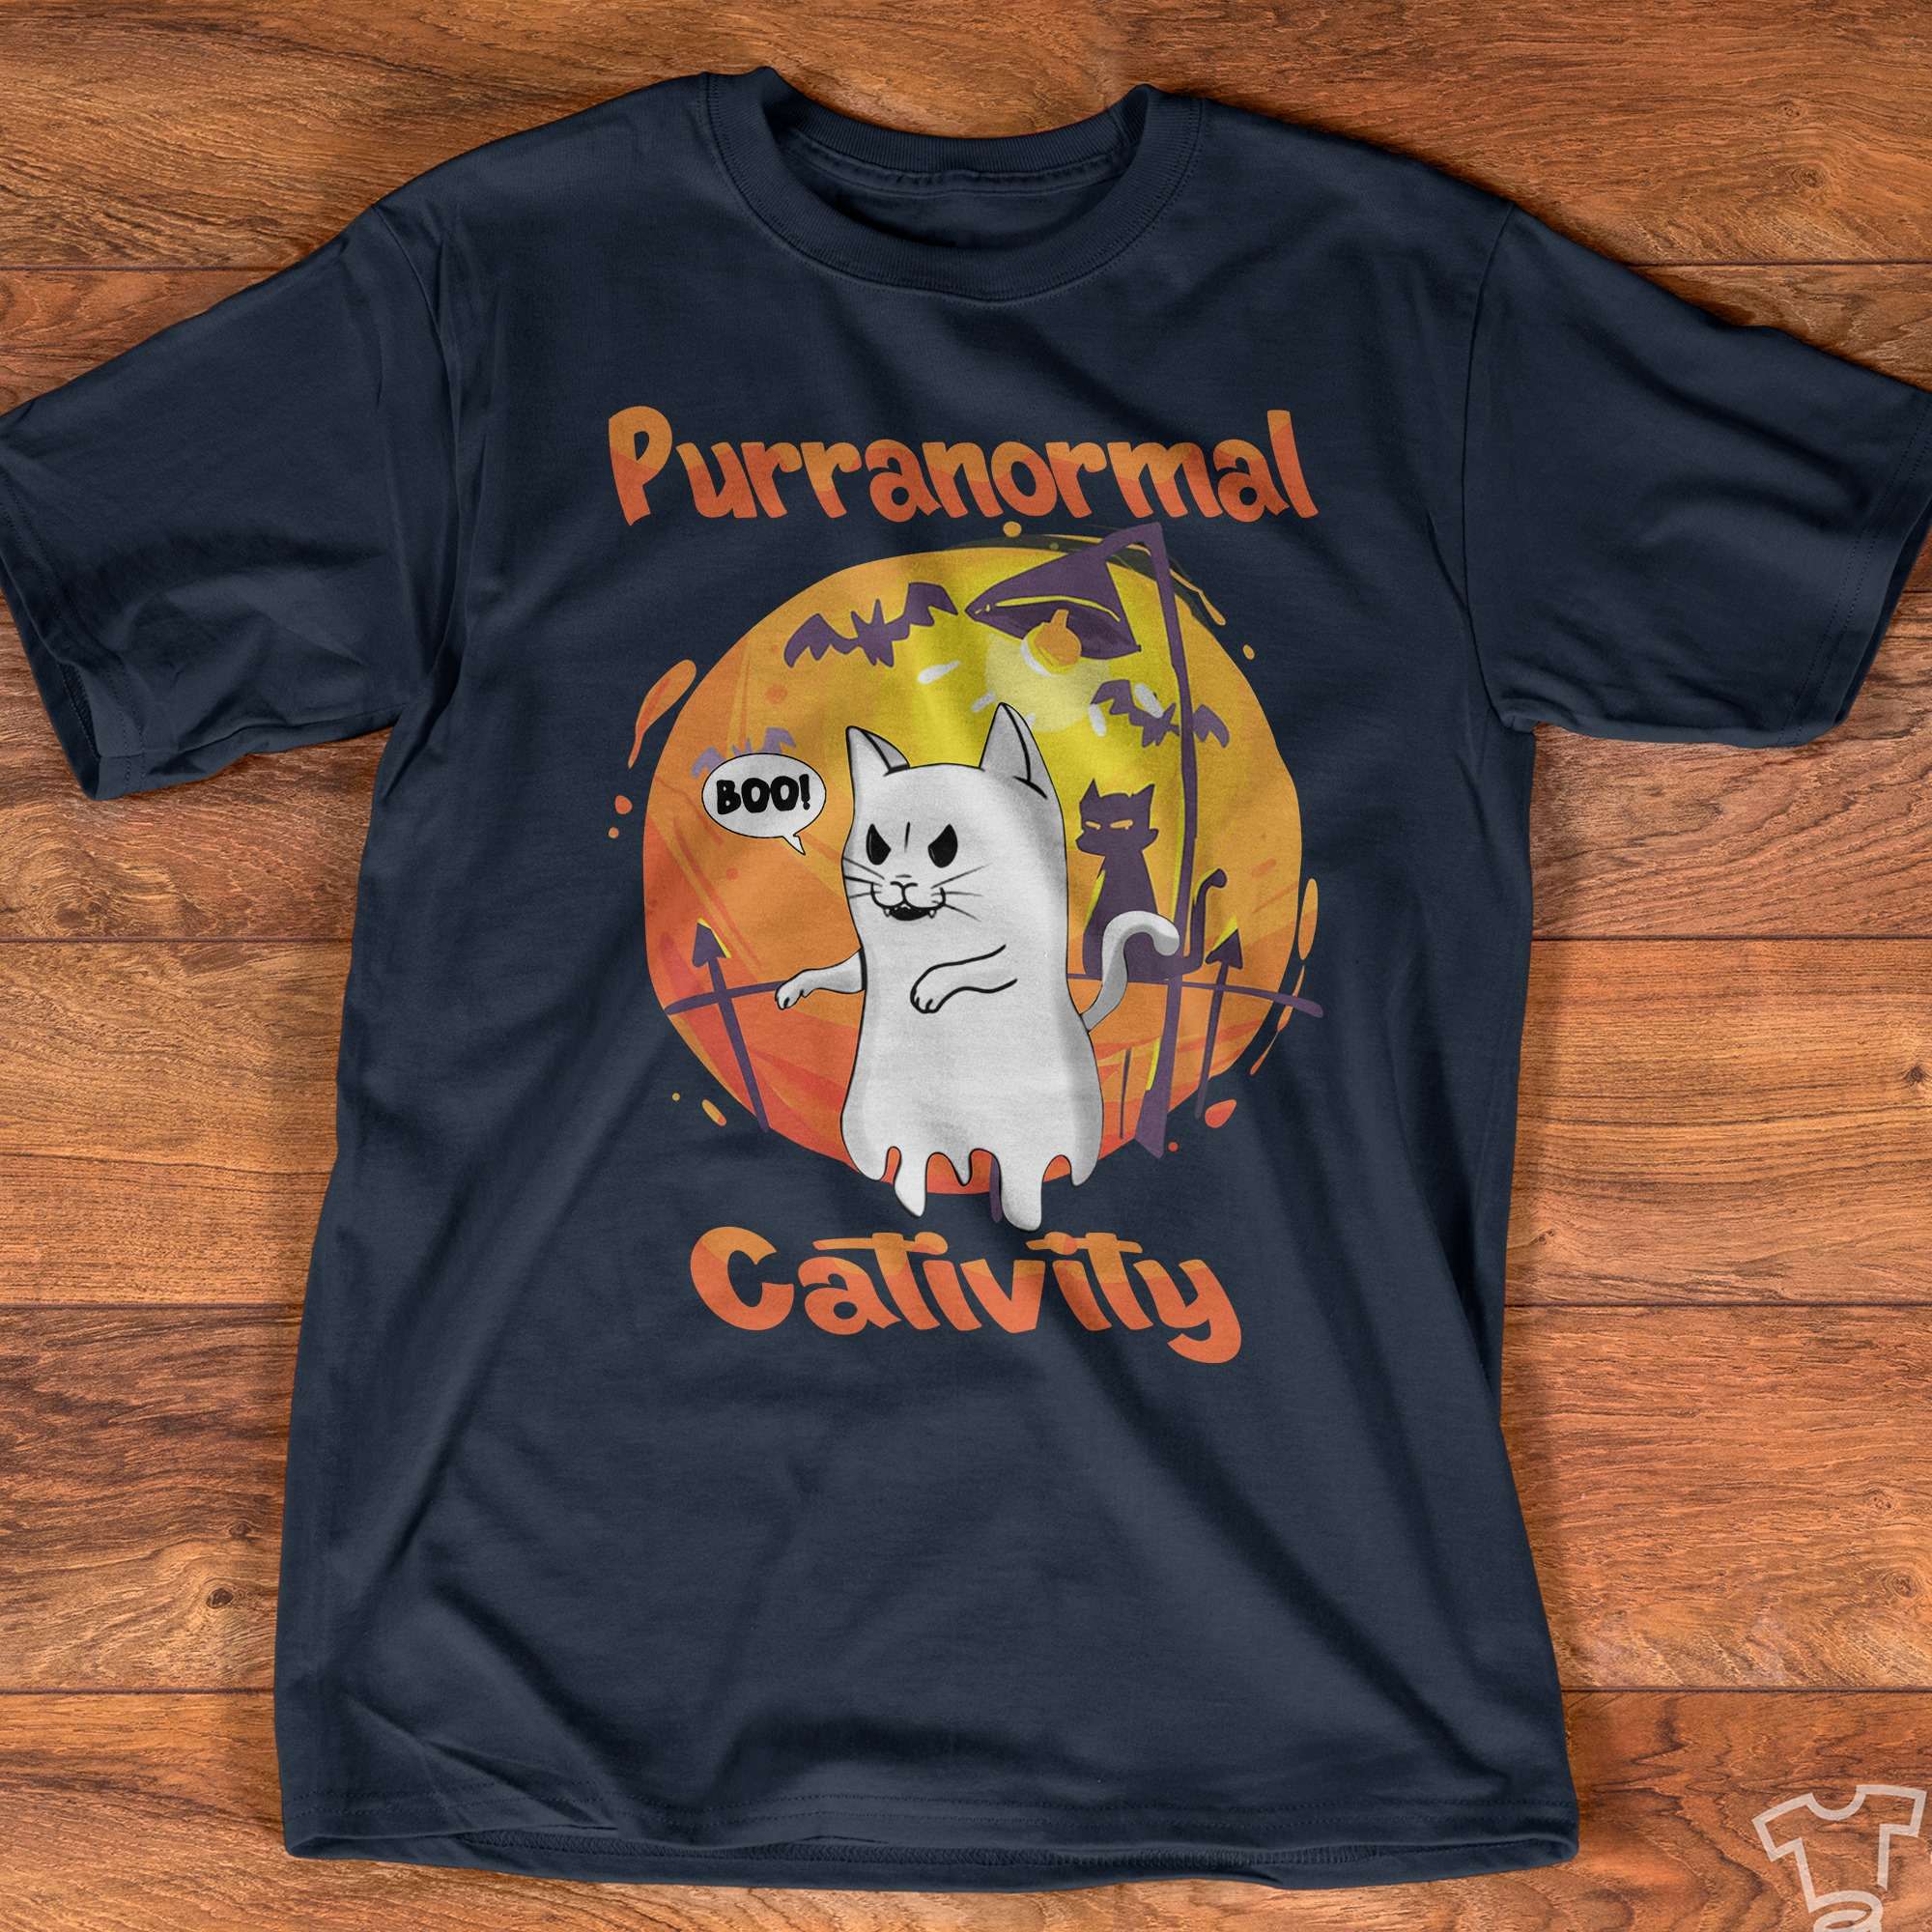 Purranormal cativity - Halloween white boo cat, T-shirt for Halloween day